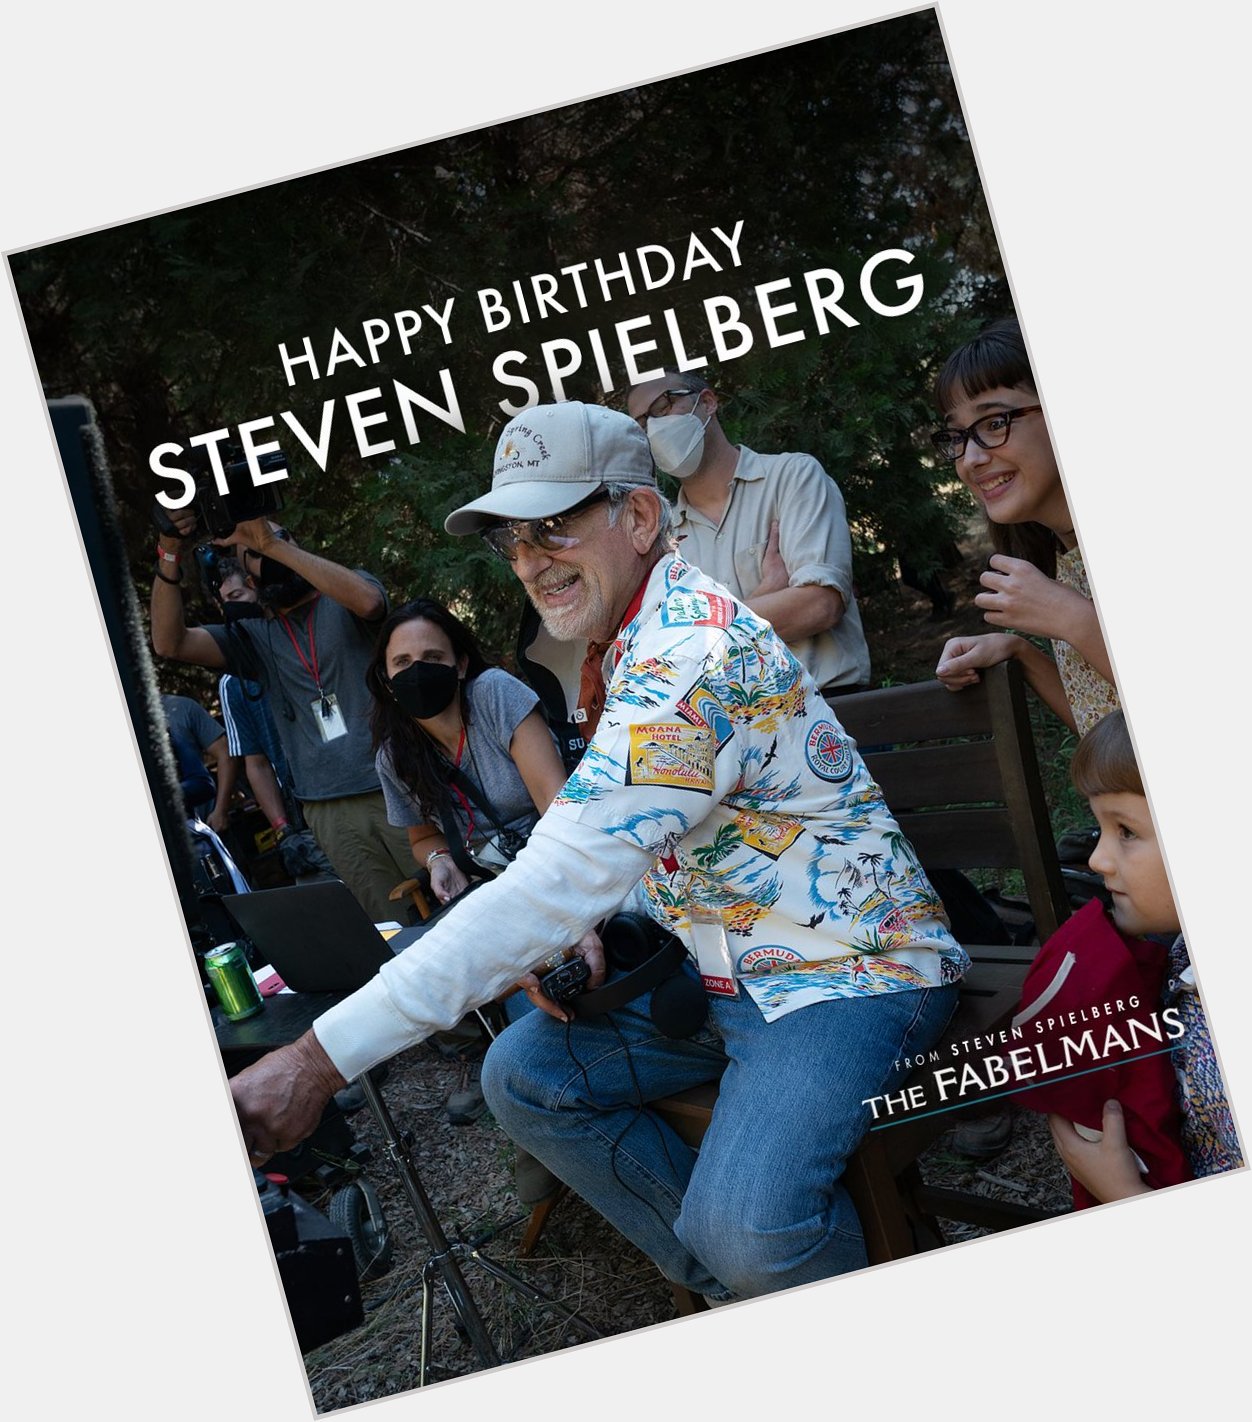 Wishing a very happy birthday to our director, Steven Spielberg 